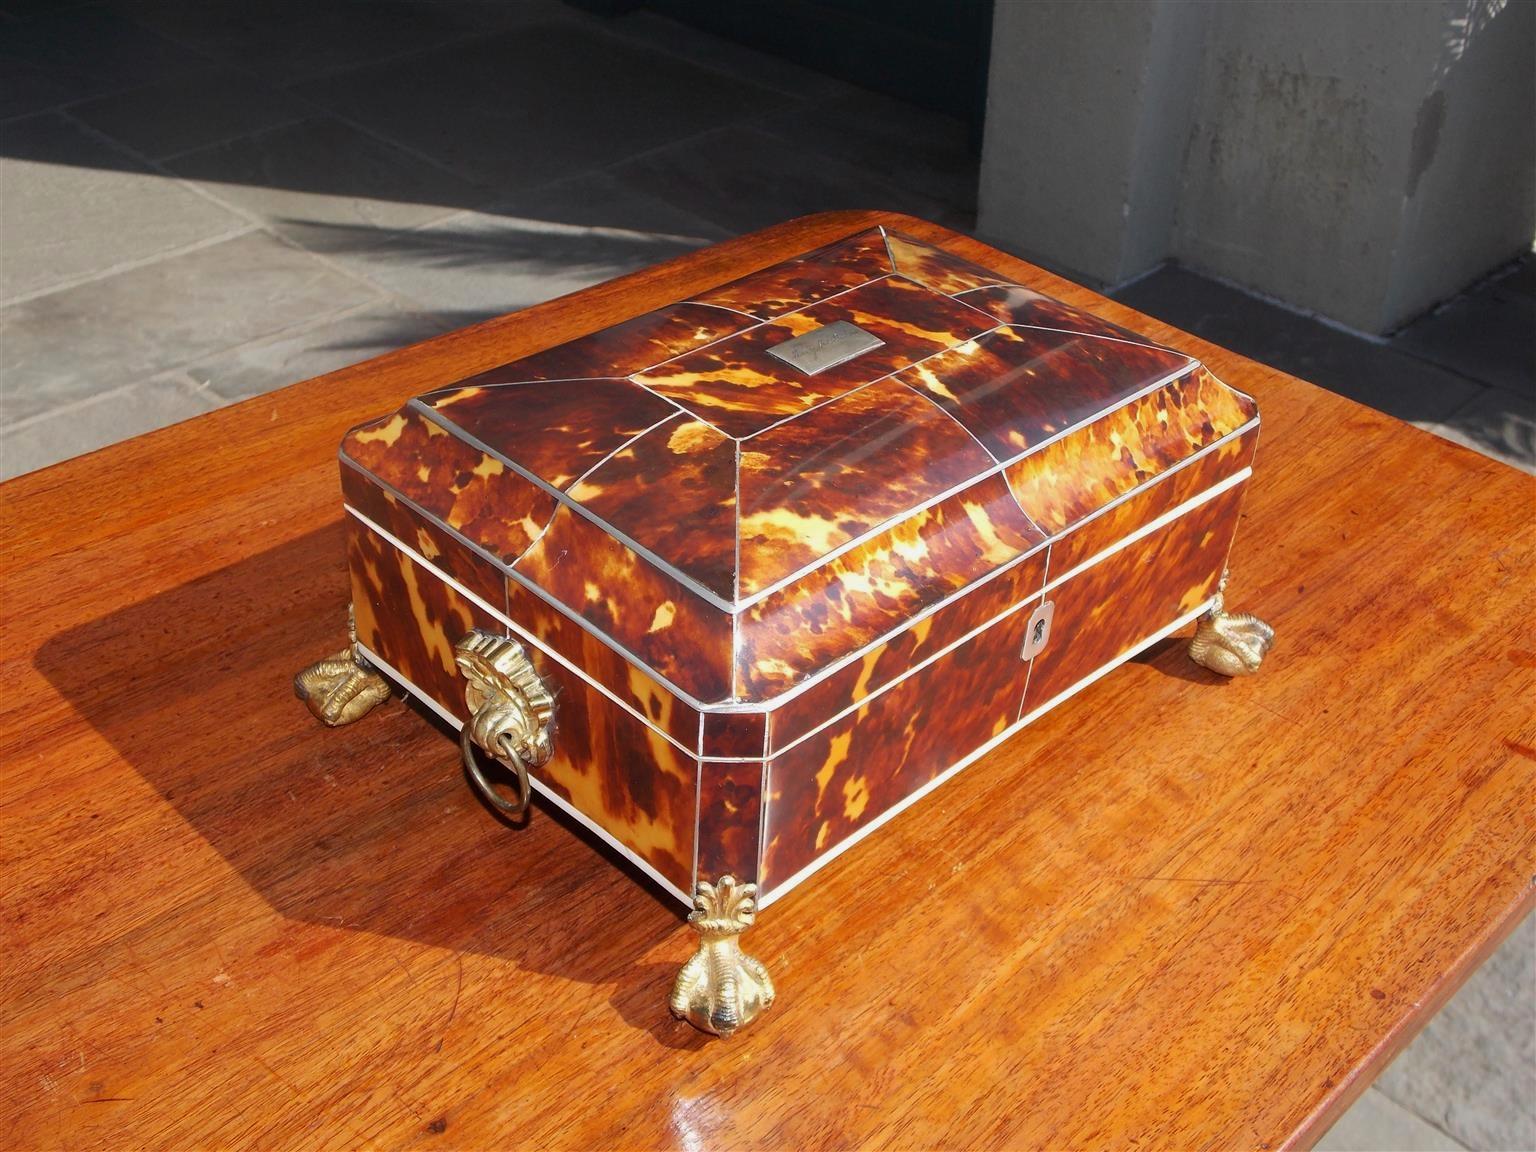 English Georgian tortoise shell hinged sewing box with gilt floral ringed side handles, compartmentalized tufted fitted interior with lid, and resting on the original gilt claw and ball feet. Early 19th century.